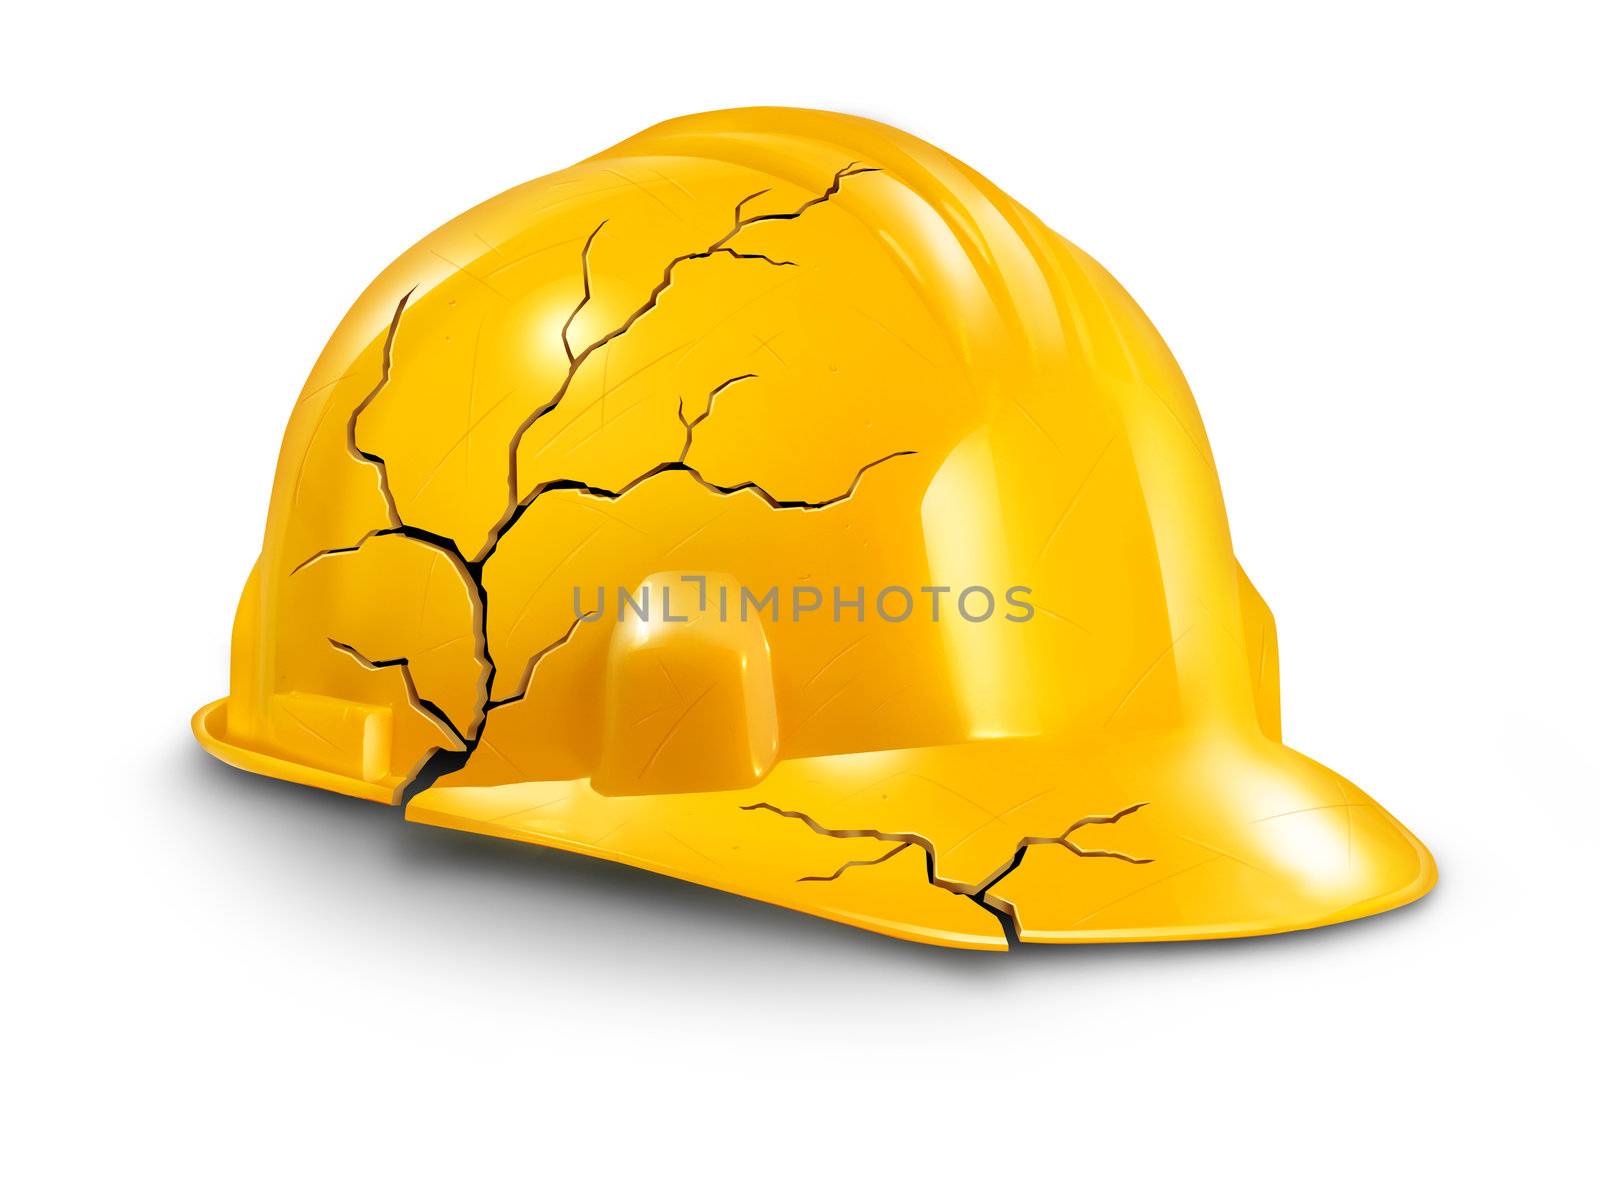 Work accident and health hazards on the job as a broken cracked yellow hardhat helmet as a symbol of working injury and insurance claims from physical damage and pain to the worker.